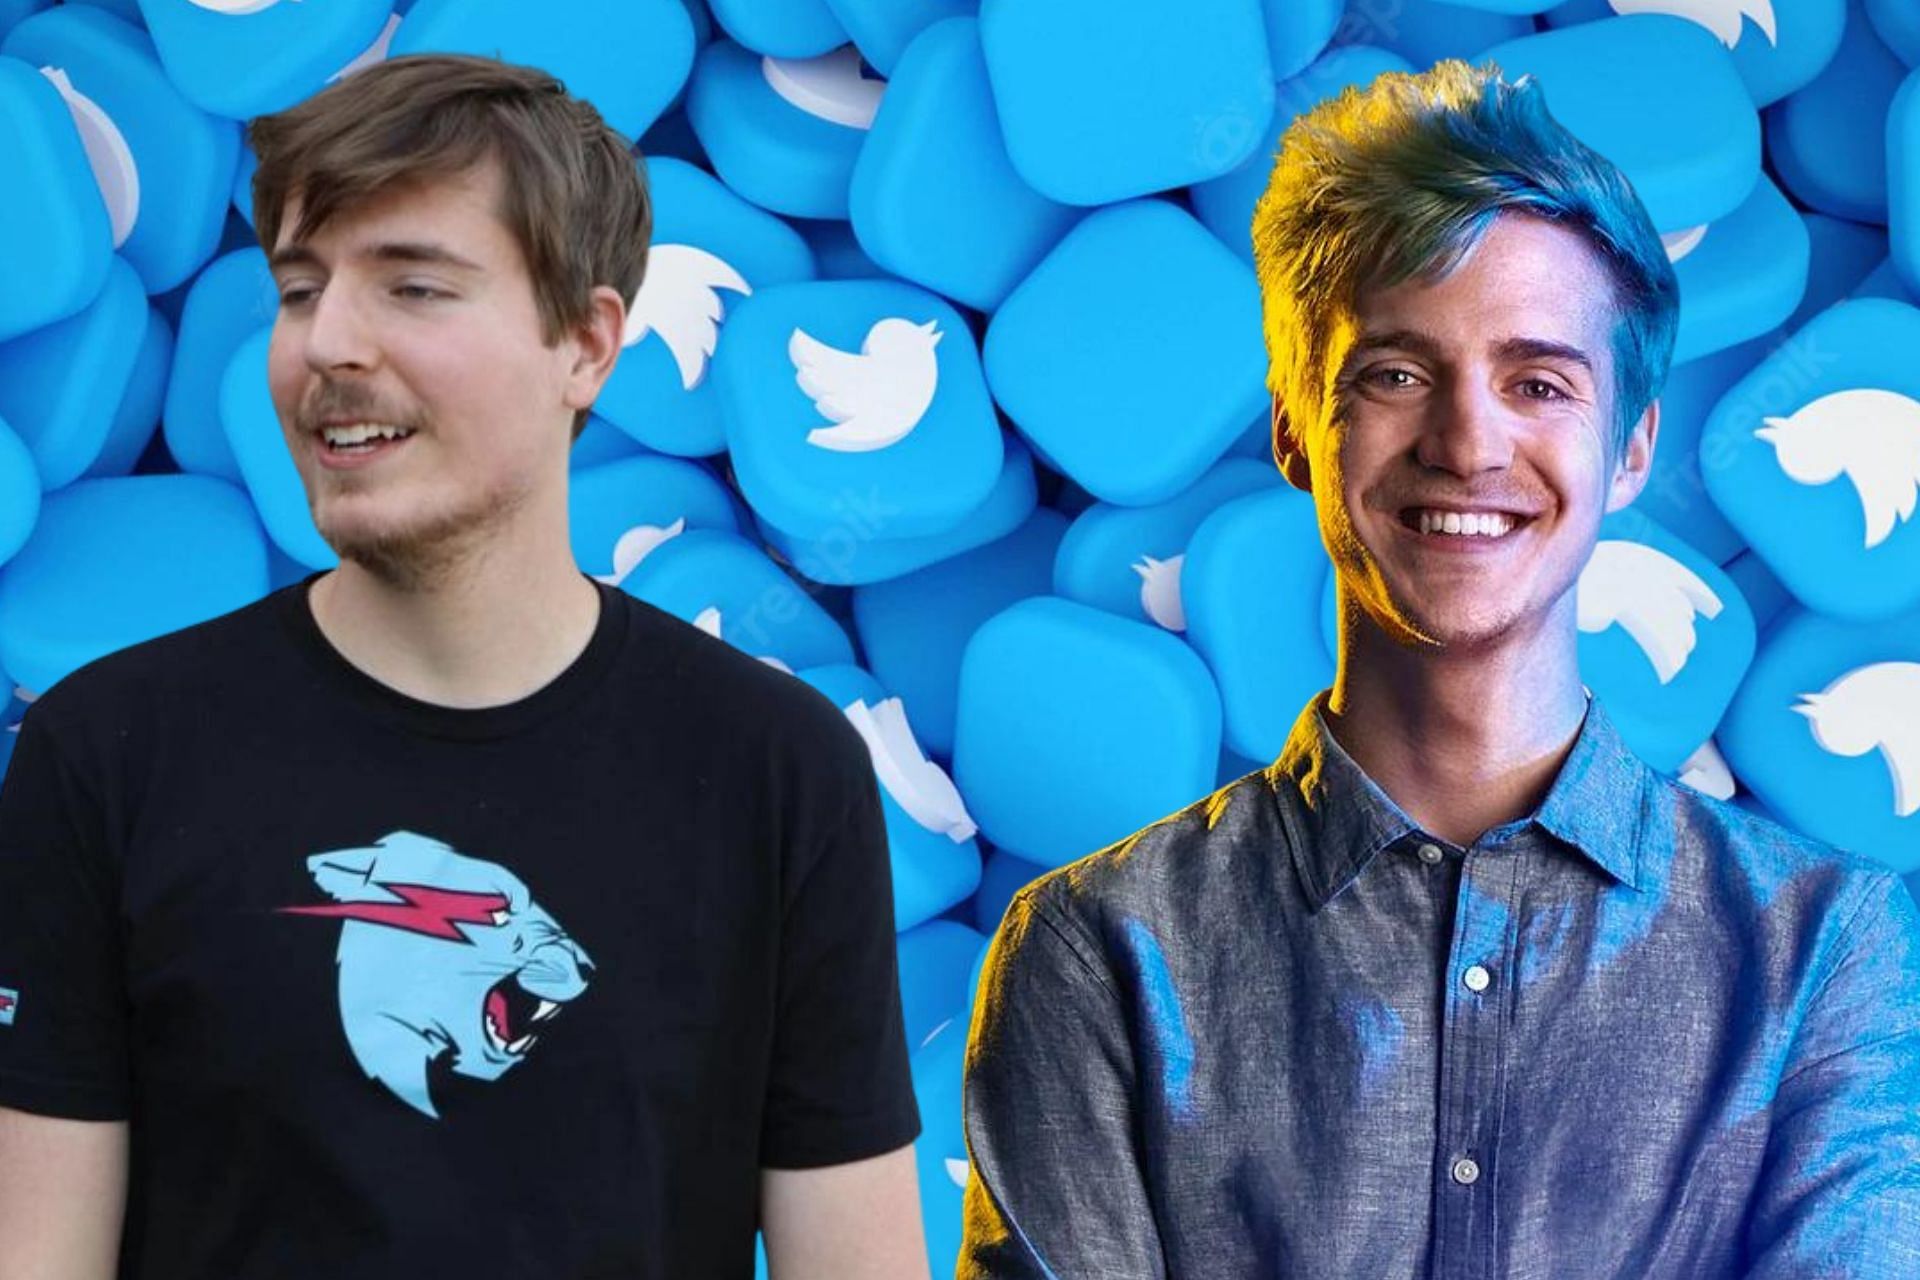 MrBeast and Ninja have had a recent Twitter beef that has led to a major League of Legends match (Image via Sportskeeda)